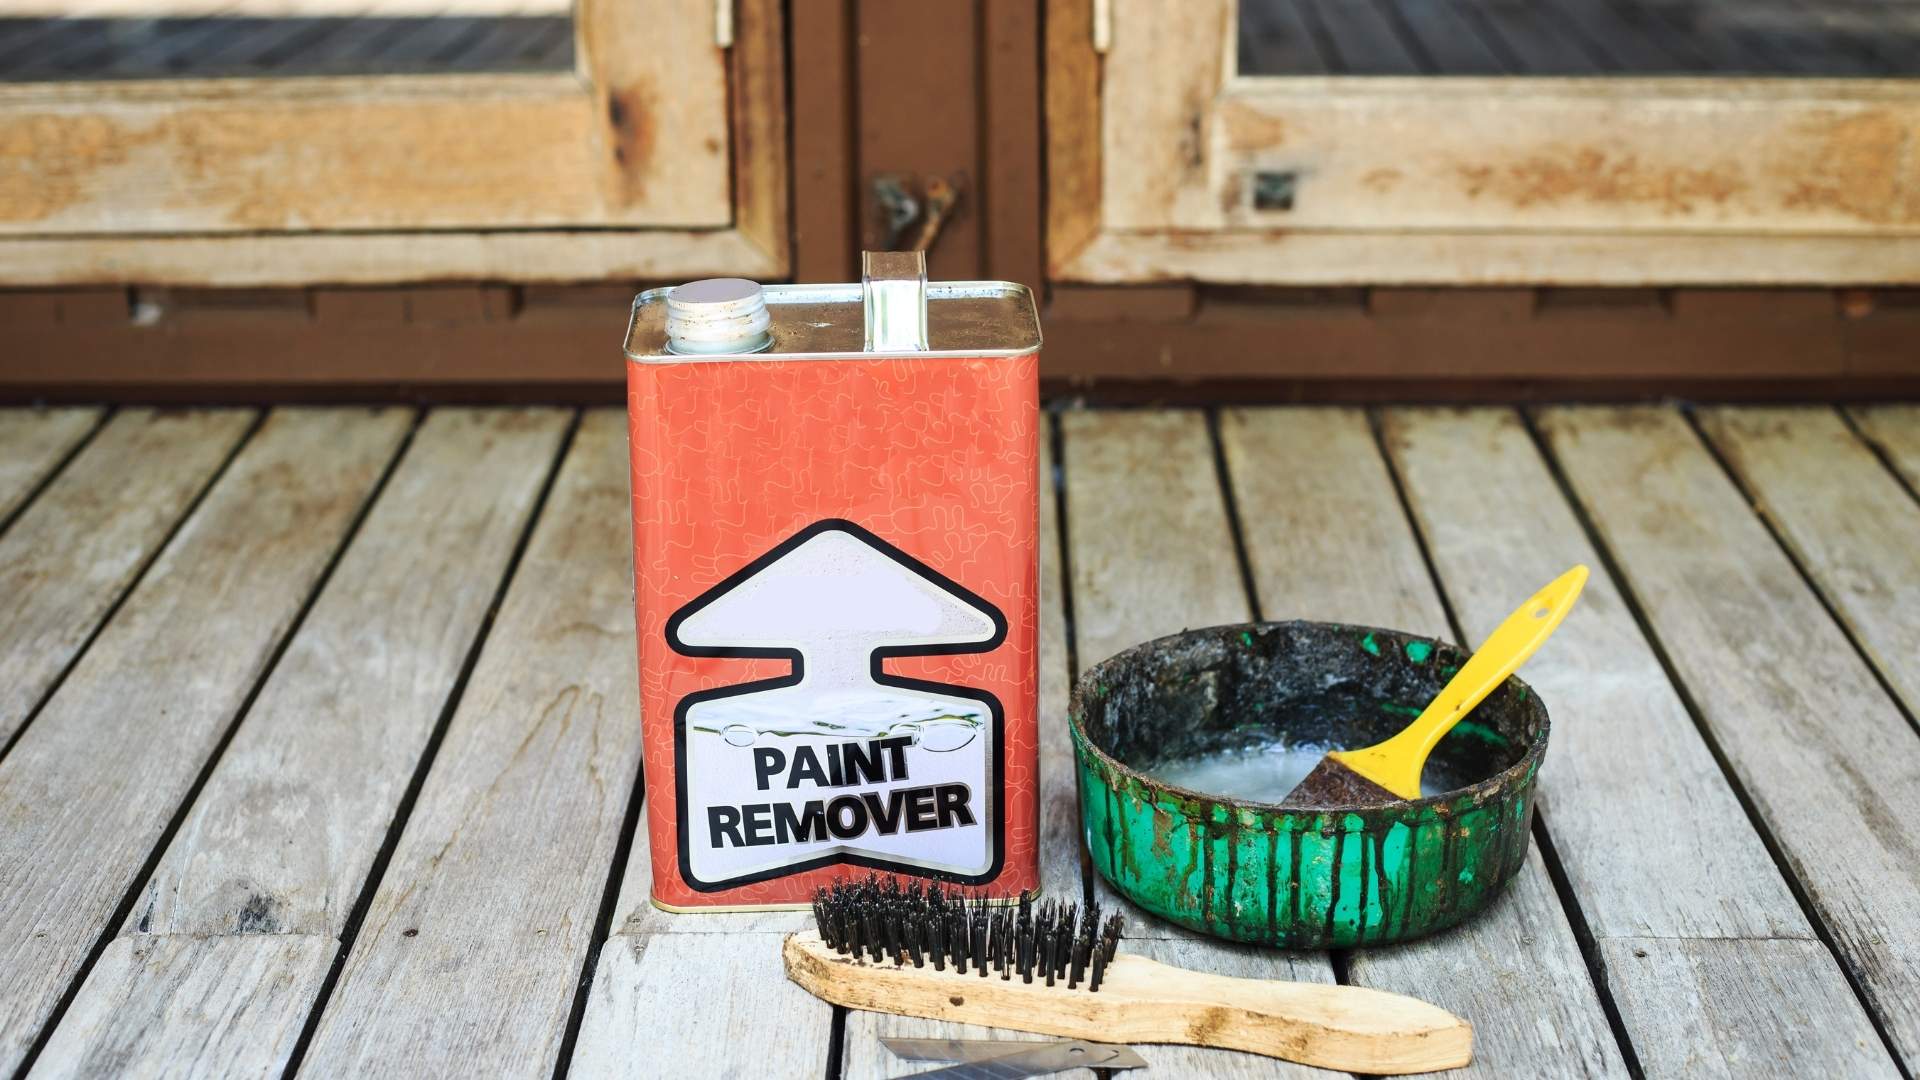 How to Remove Chalk Paint Step-By-Step - A1 Paint